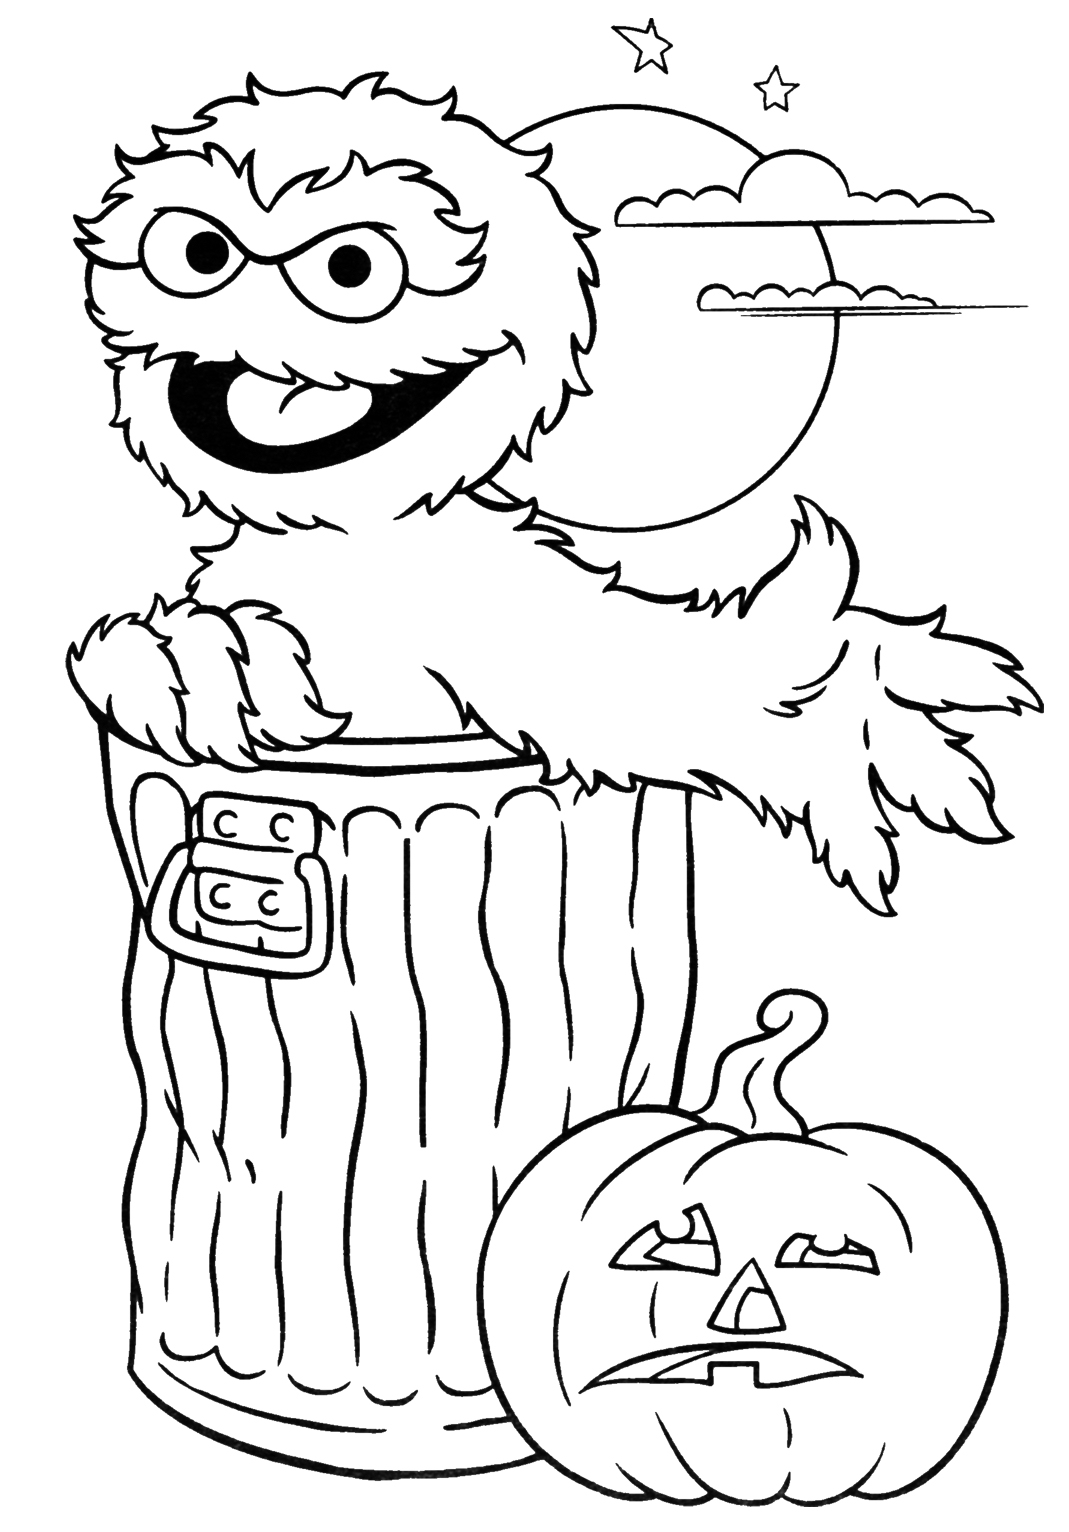 Drawing Sesame street #32187 (Cartoons) – Printable coloring pages